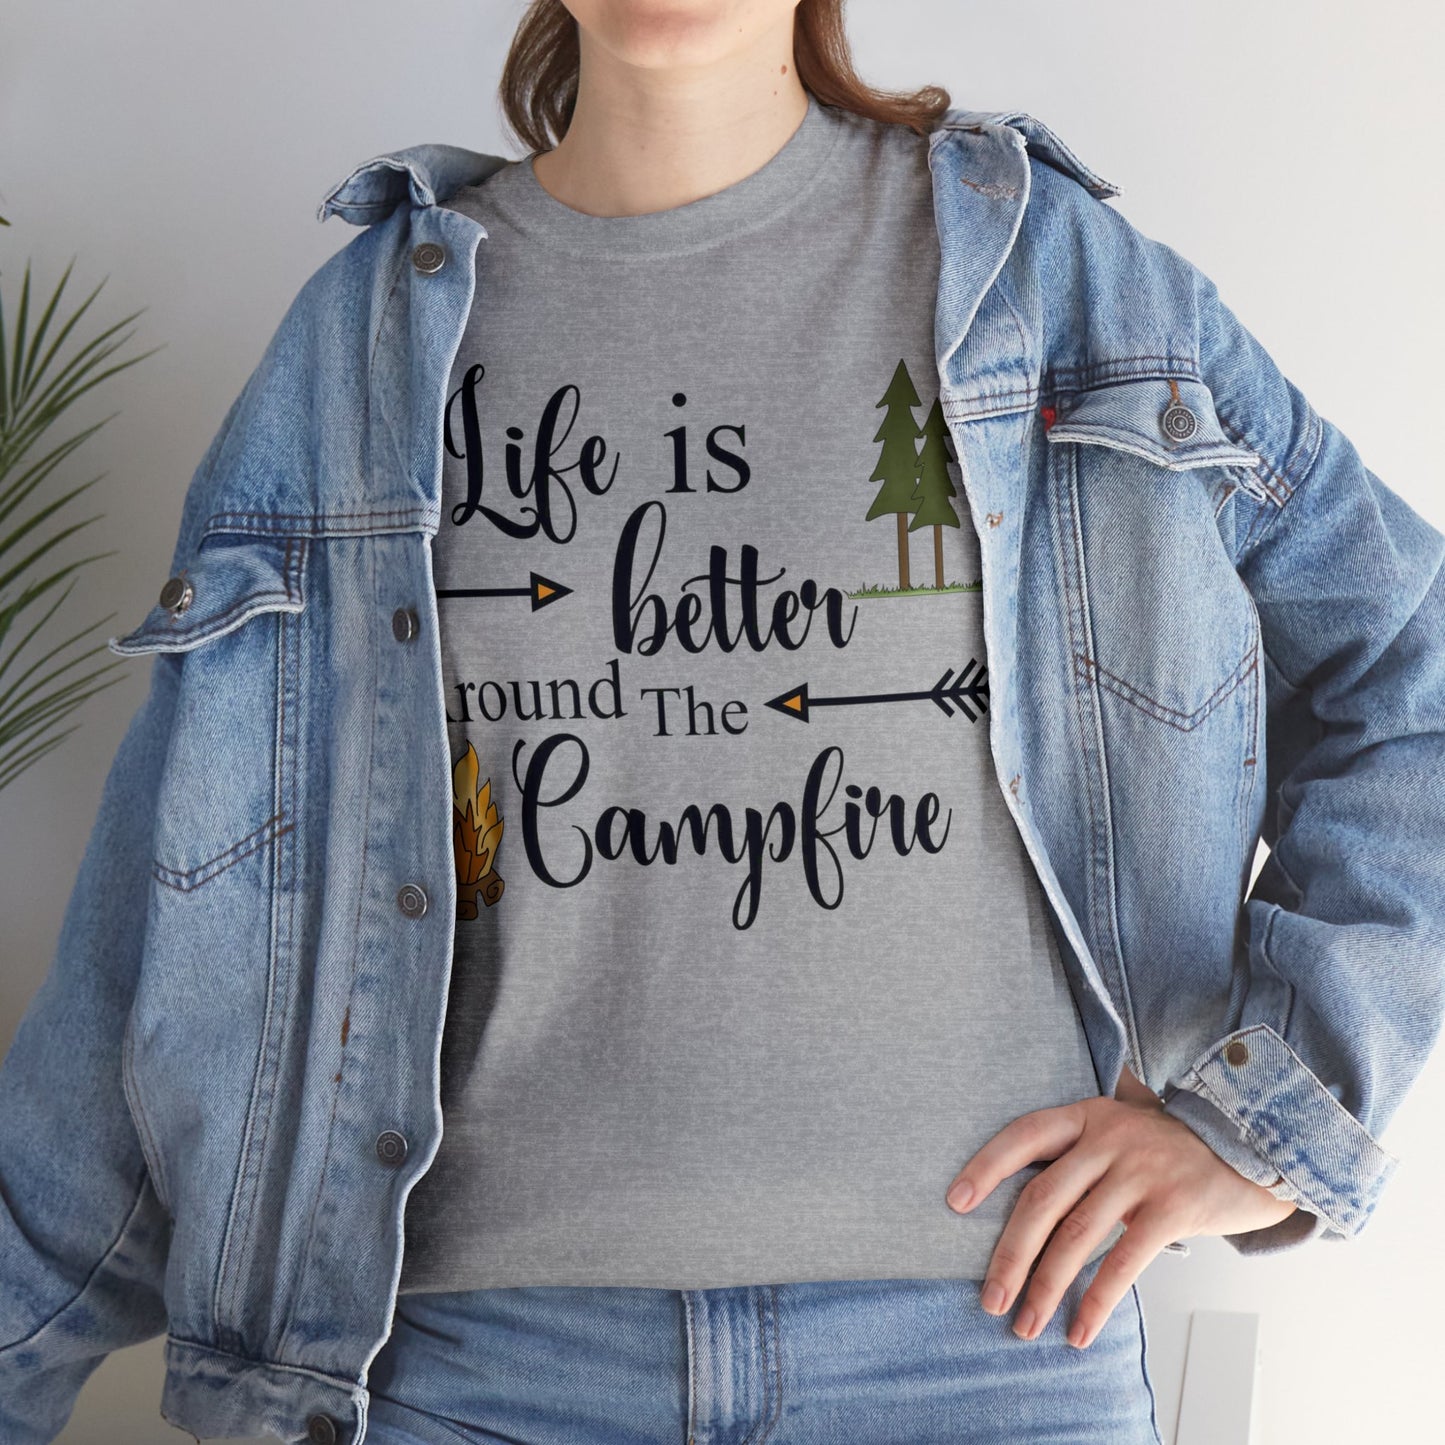 Life Is Better Around The Campfire Heavy Cotton Tee